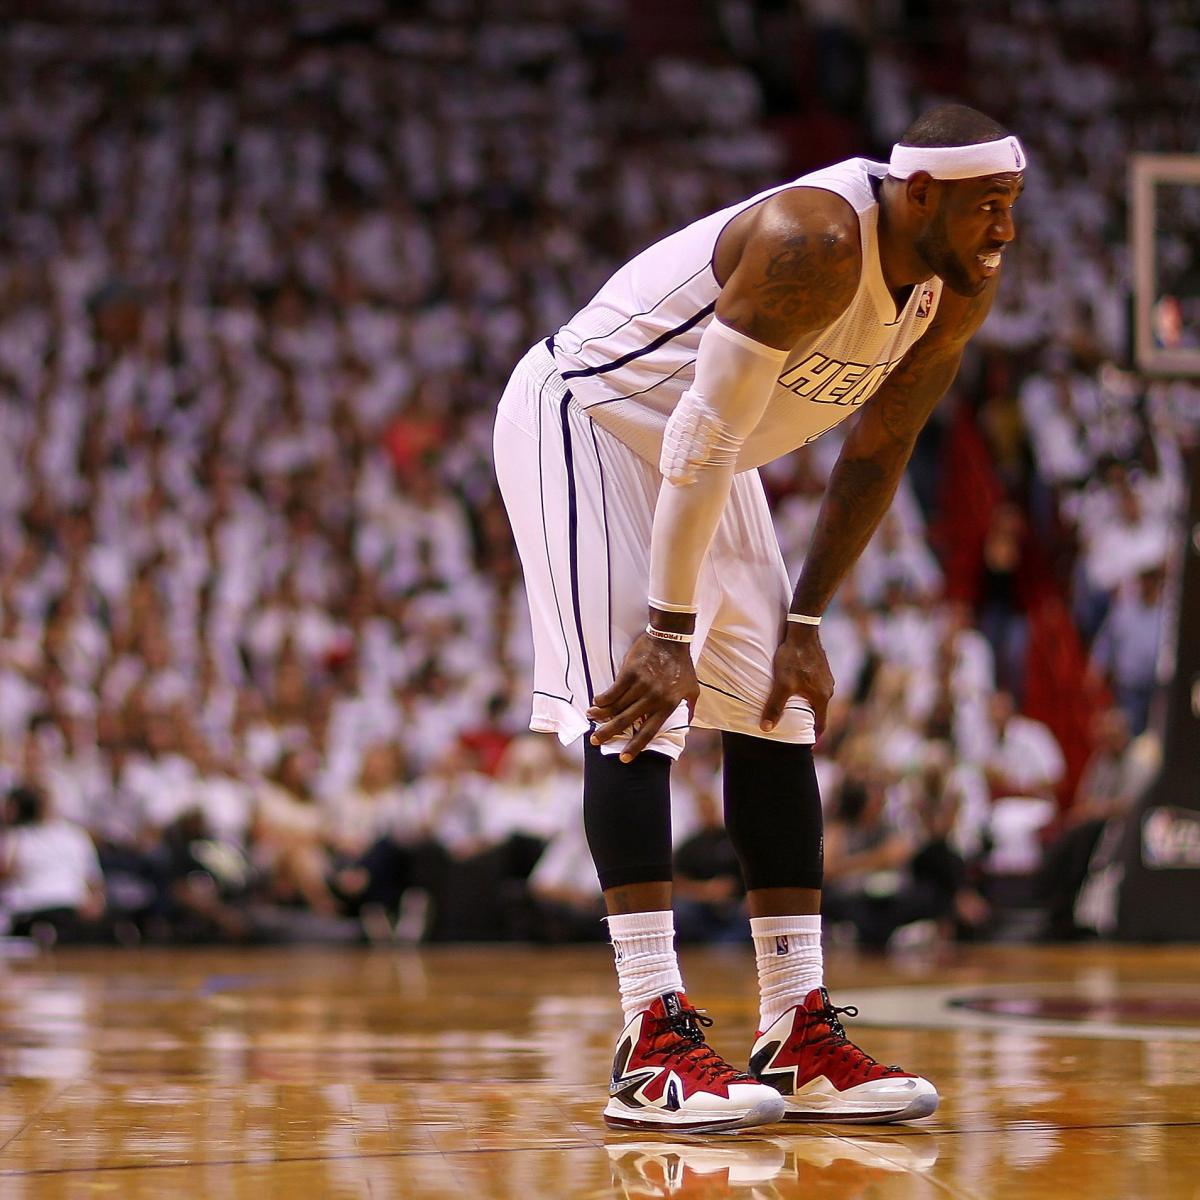 LeBron James Signature Sneakers: Ranking the Best of the King